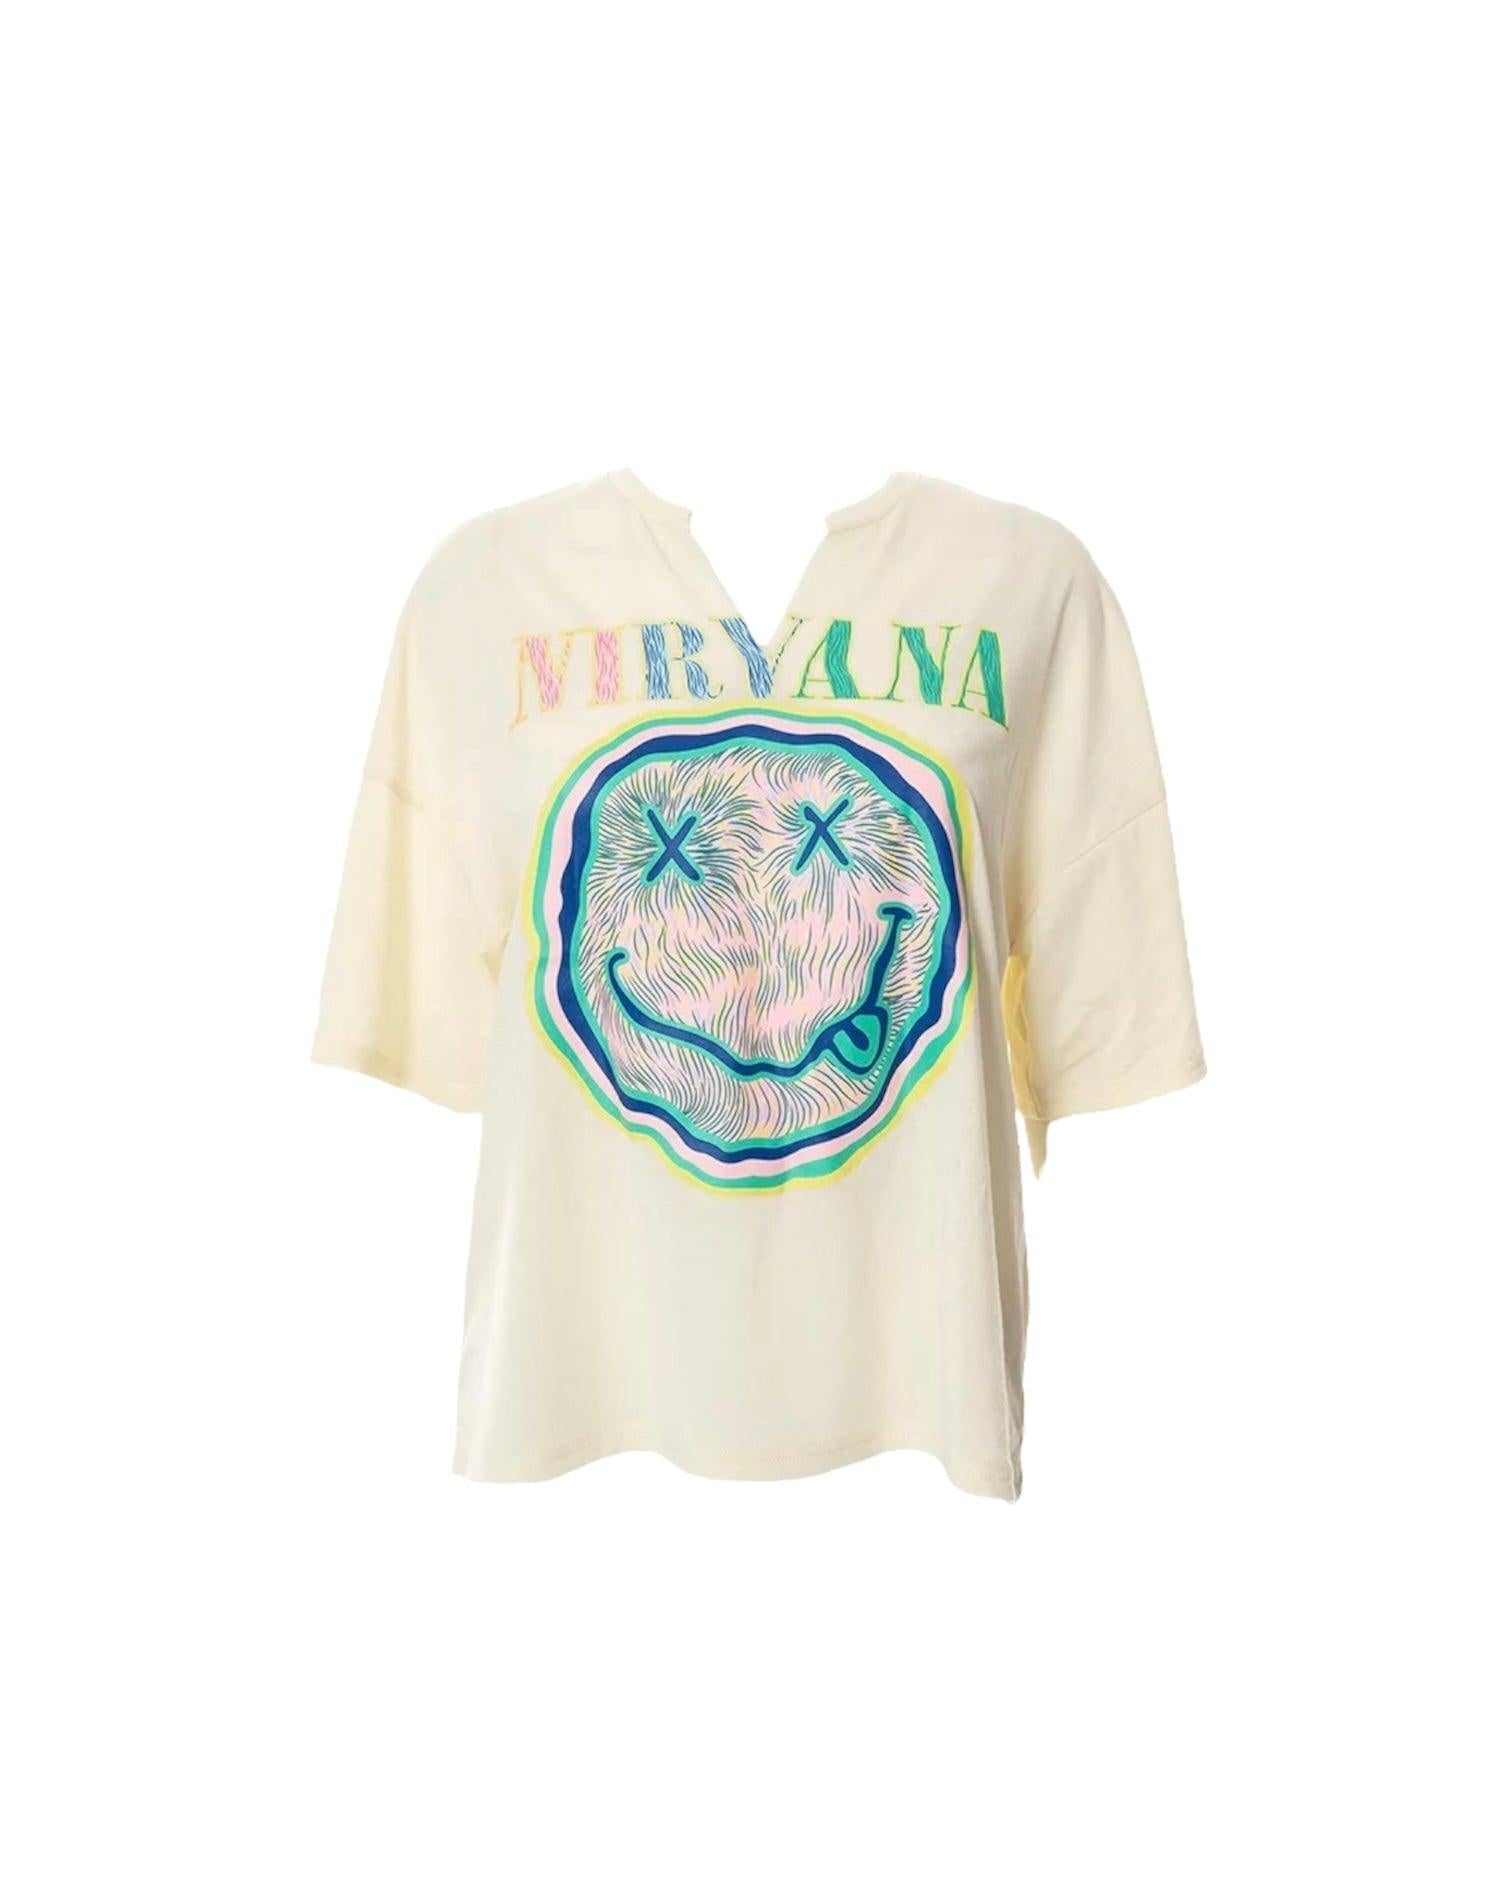 Nirvana Loose T-Shirt - Dezired Beauty Boutique